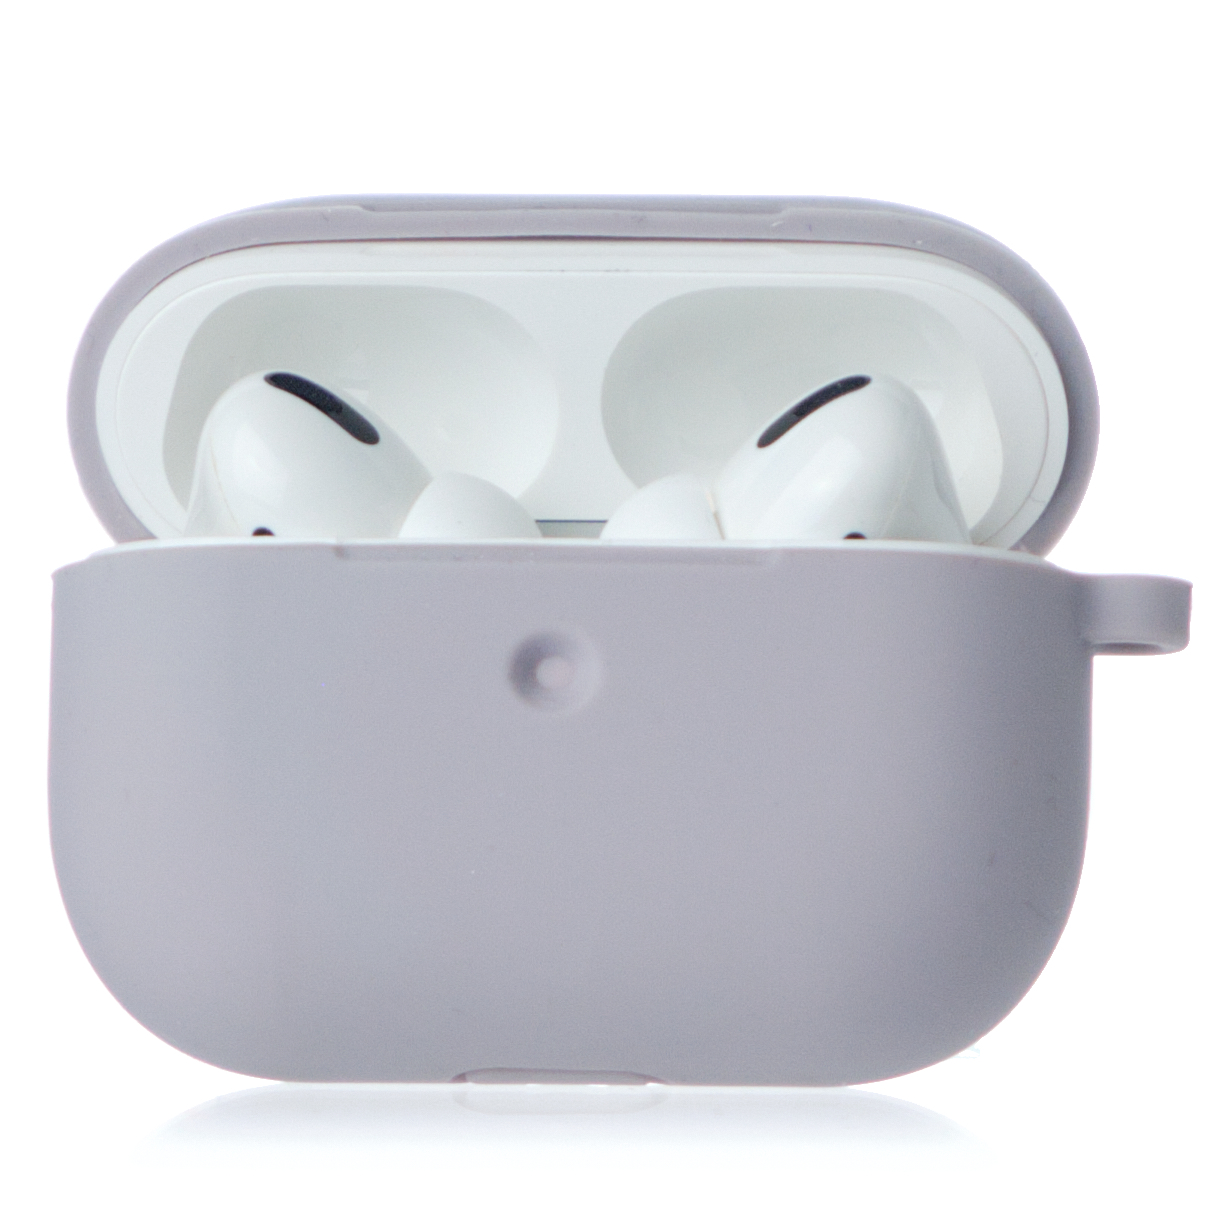 Чехол AirPods Pro Soft-touch серо-лавандовый